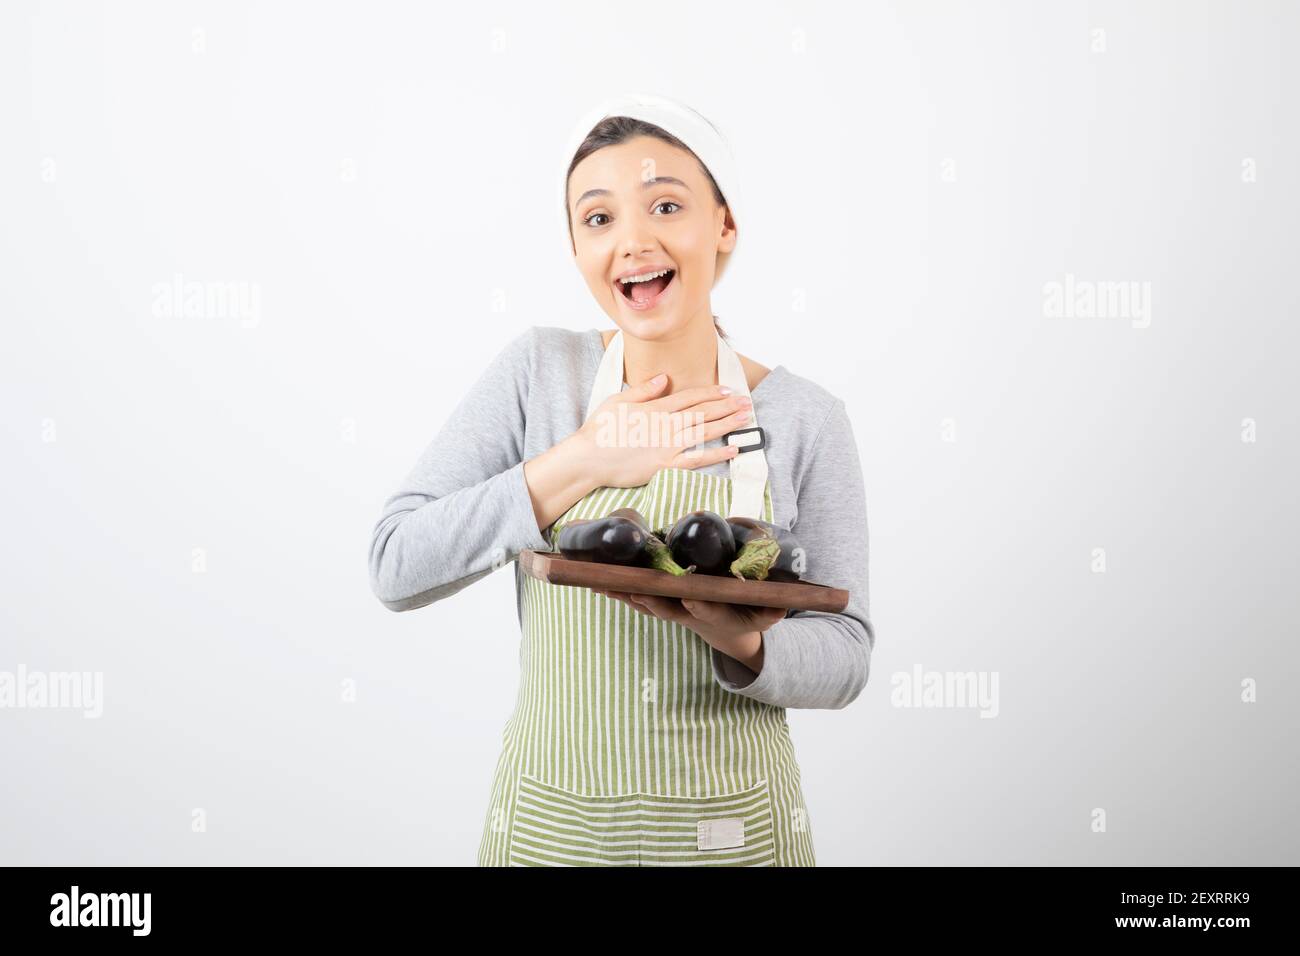 Photo of young female cook holding plate of eggplants and laughing Stock Photo